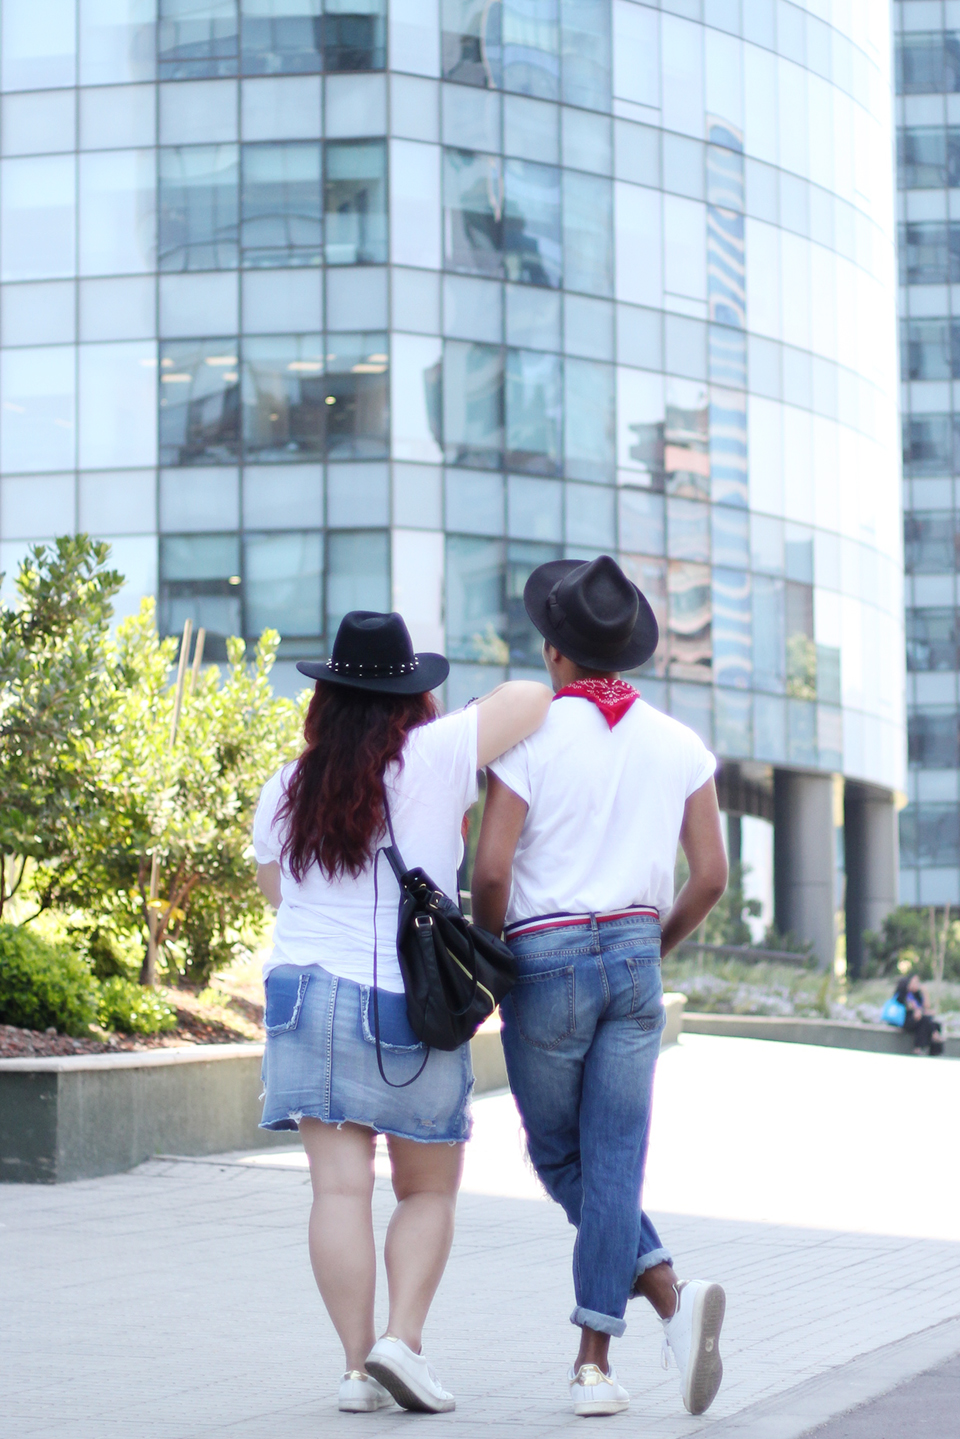 she-and-he-steal-his-style-denim-bandana-sneakers-santiago-bloggers-fashion-summer-trends-twins-hats